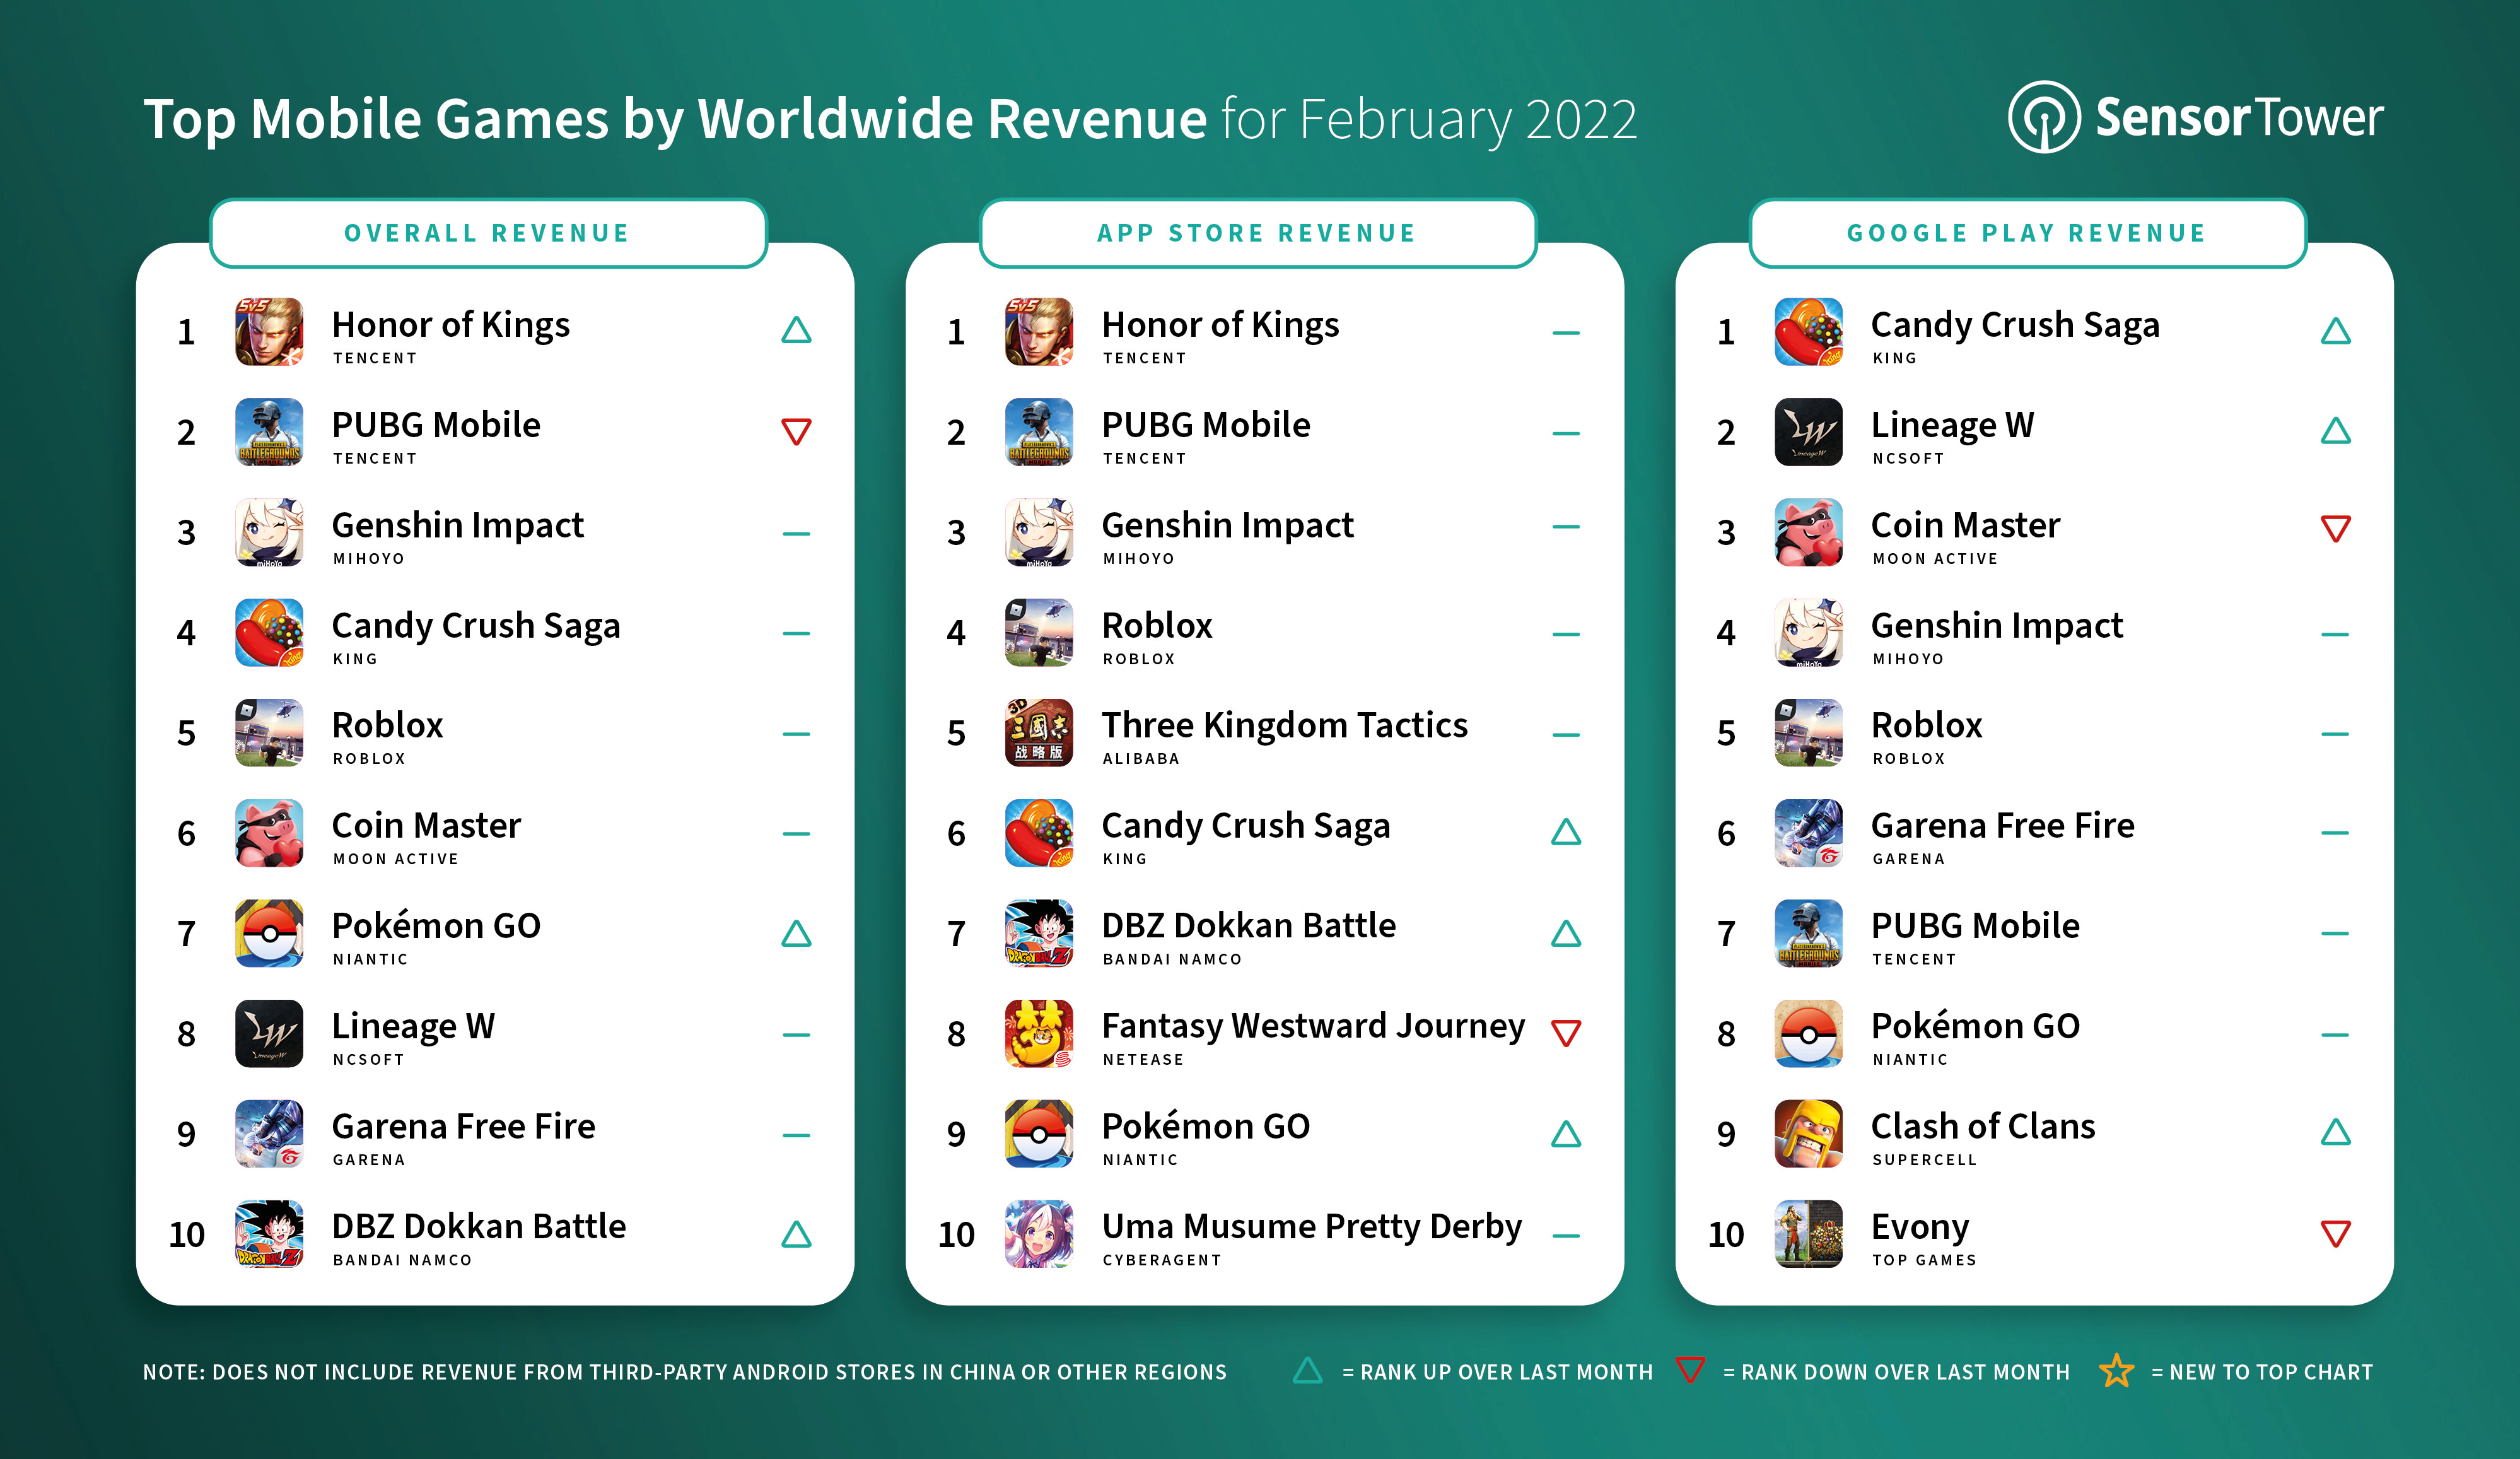 top-mobile-games-by-worldwide-revenue-february-2022